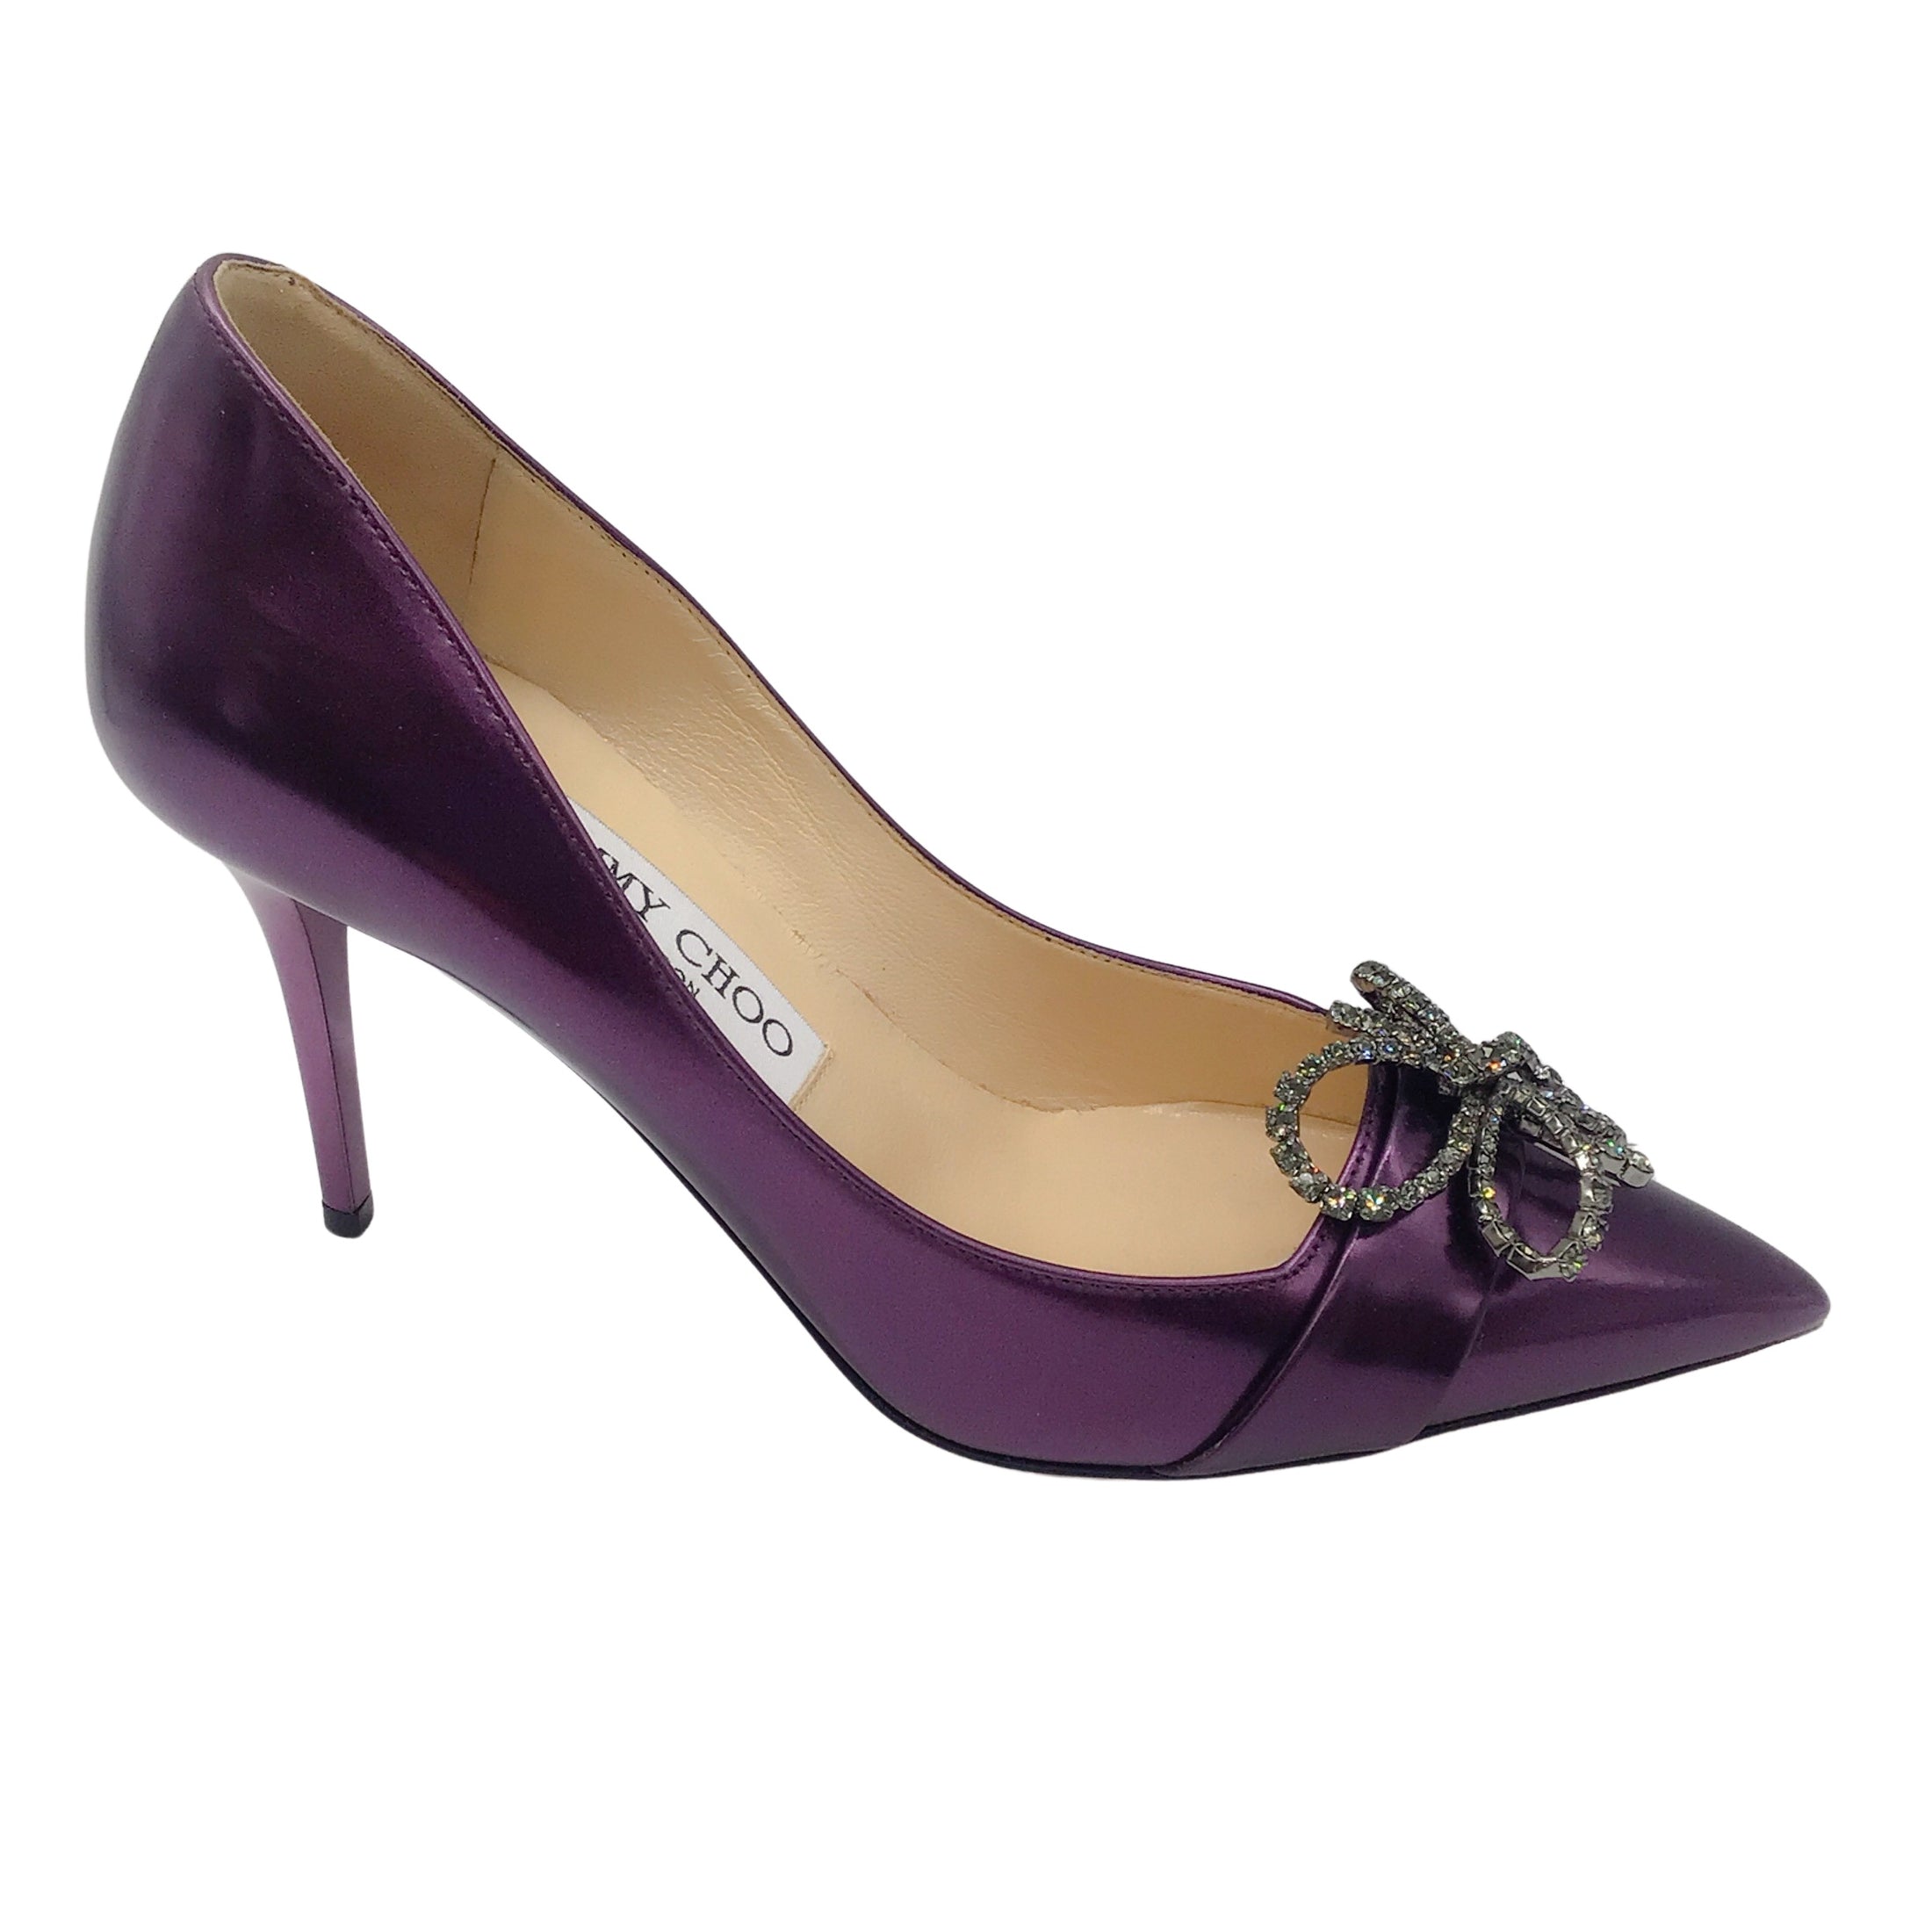 Jimmy Choo Purple Crystal Embellished Patent Leather Pumps